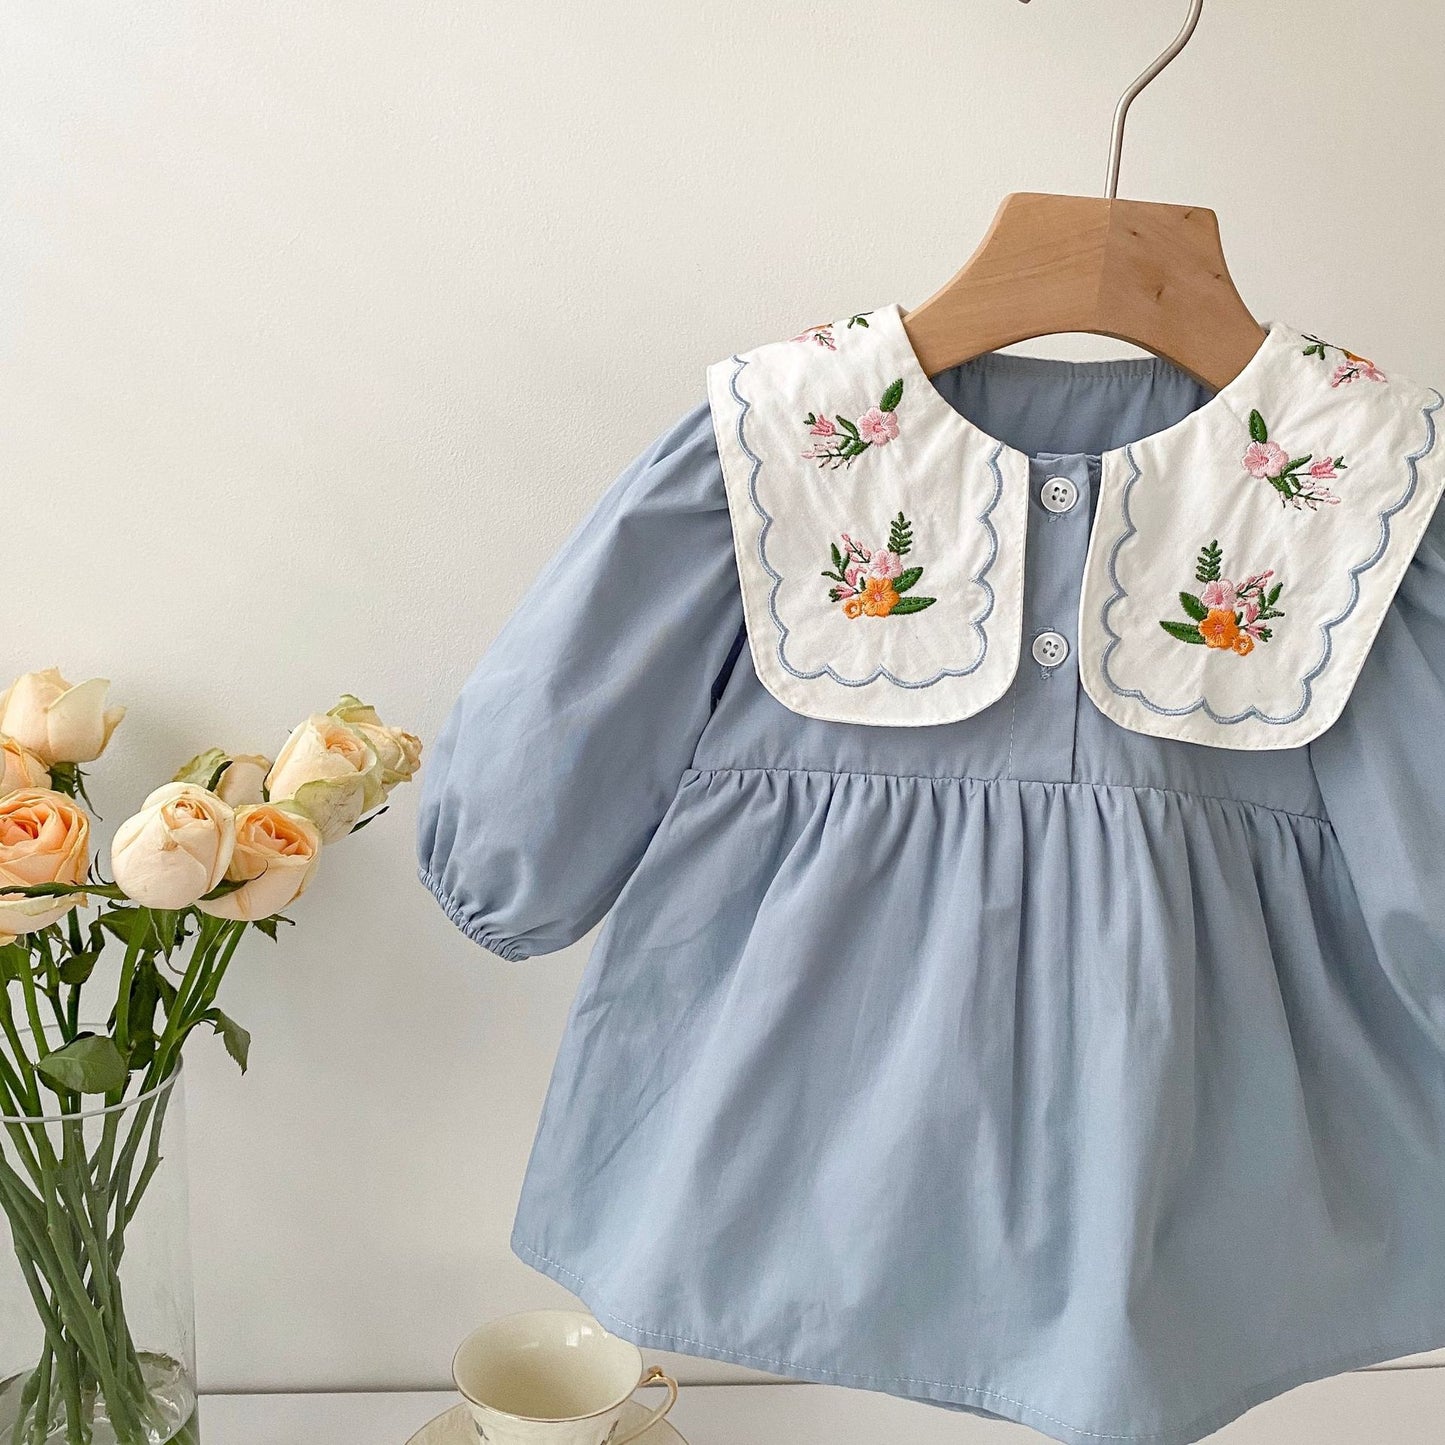 New Arrival Baby Floral Plain Princess Onesie Dress For Girls